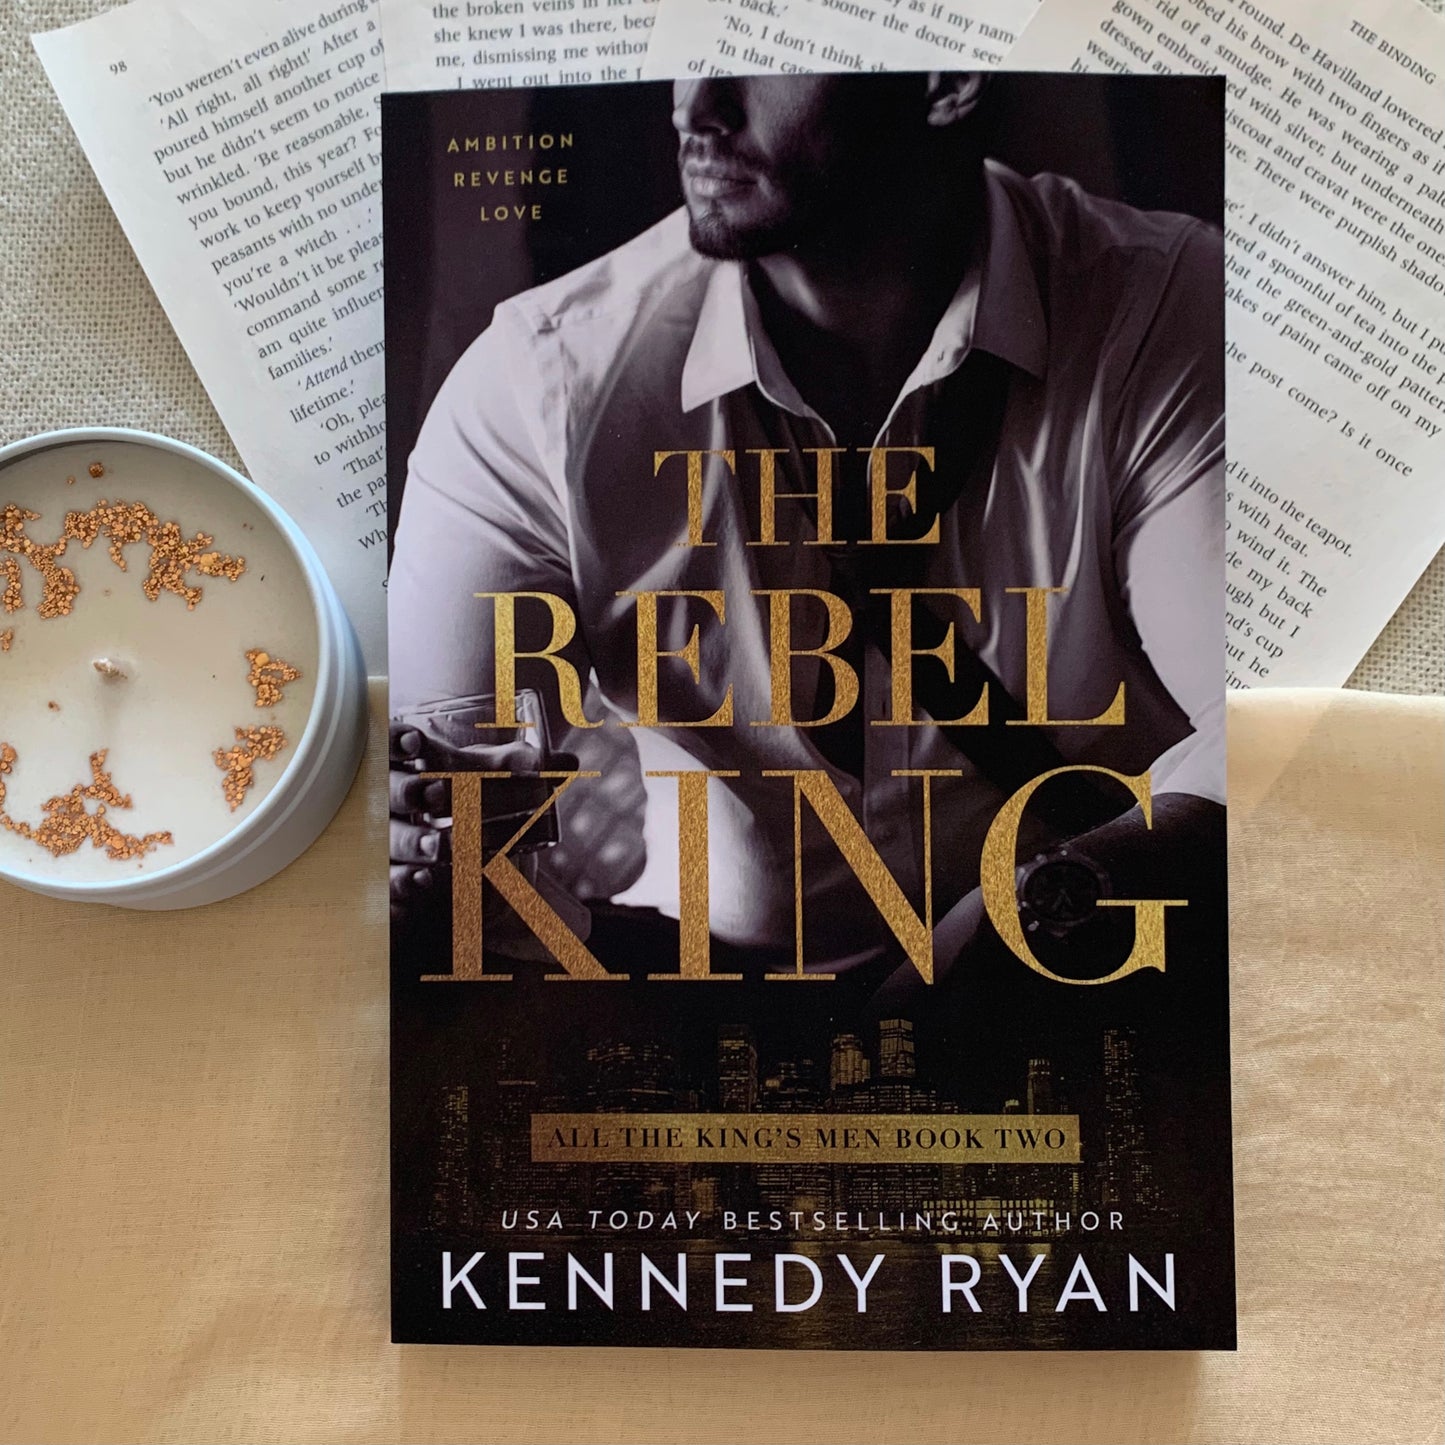 All the King’s Men series by Kennedy Ryan